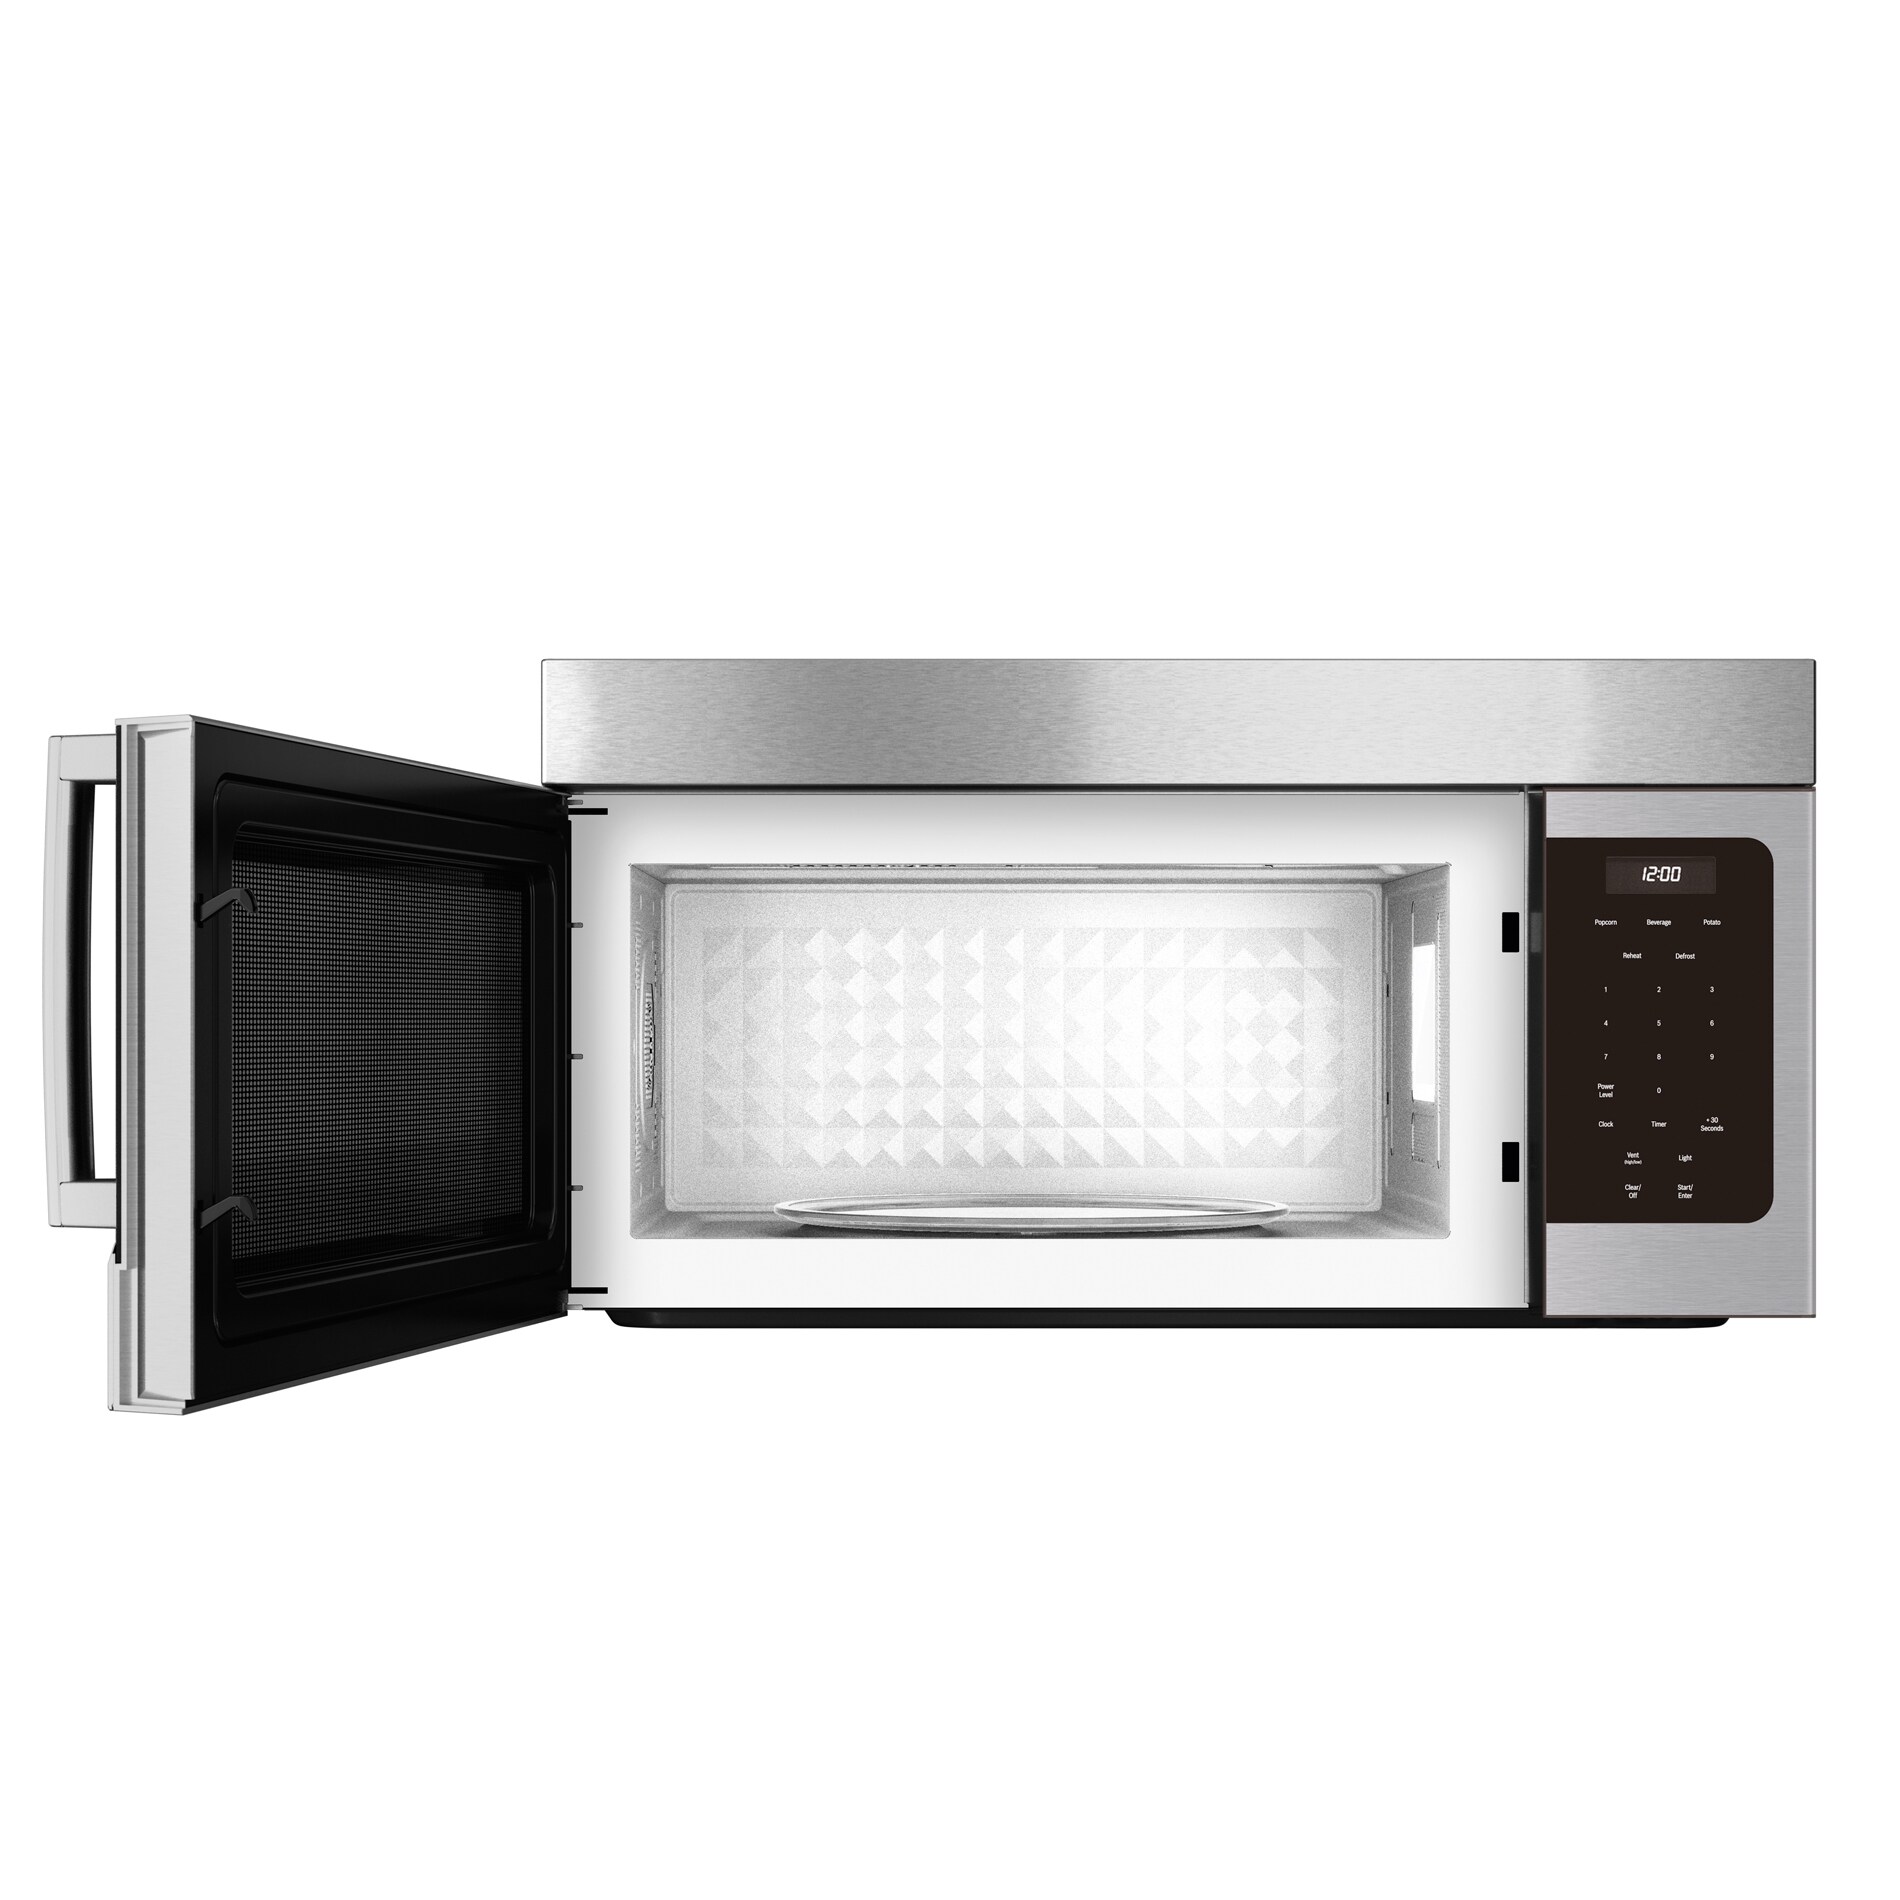 The Best Over-the-Range Microwave